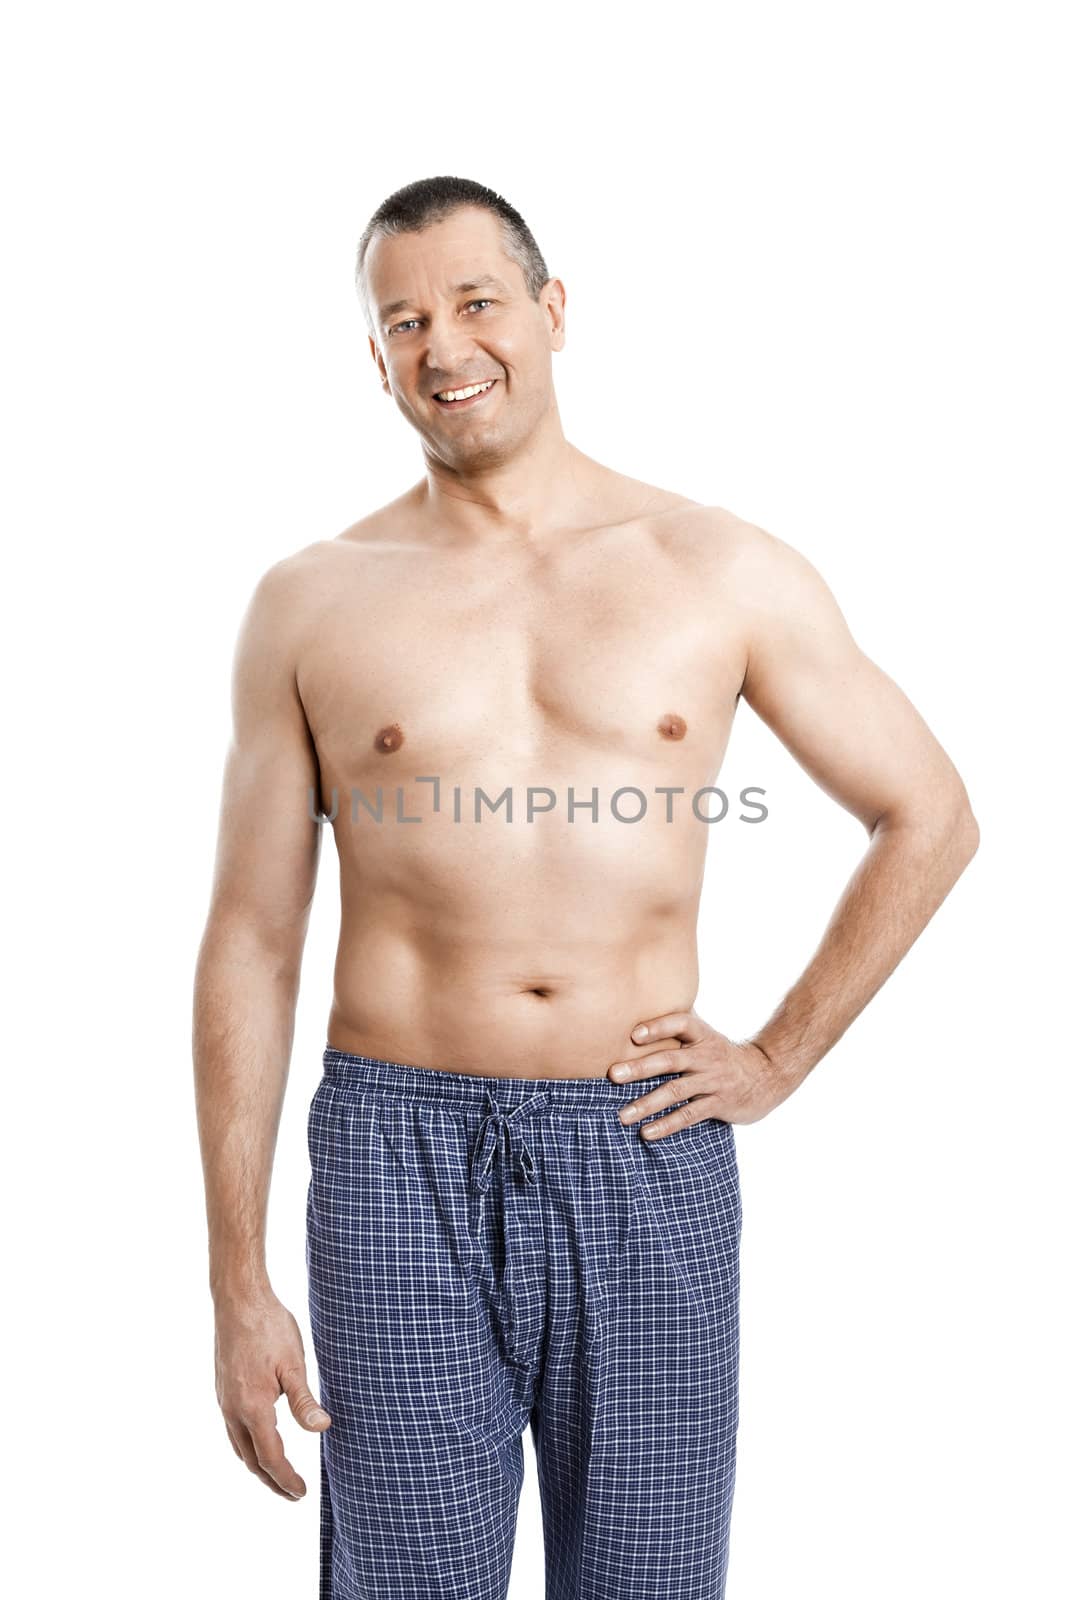 An image of a handsome man in pajamas shirtless